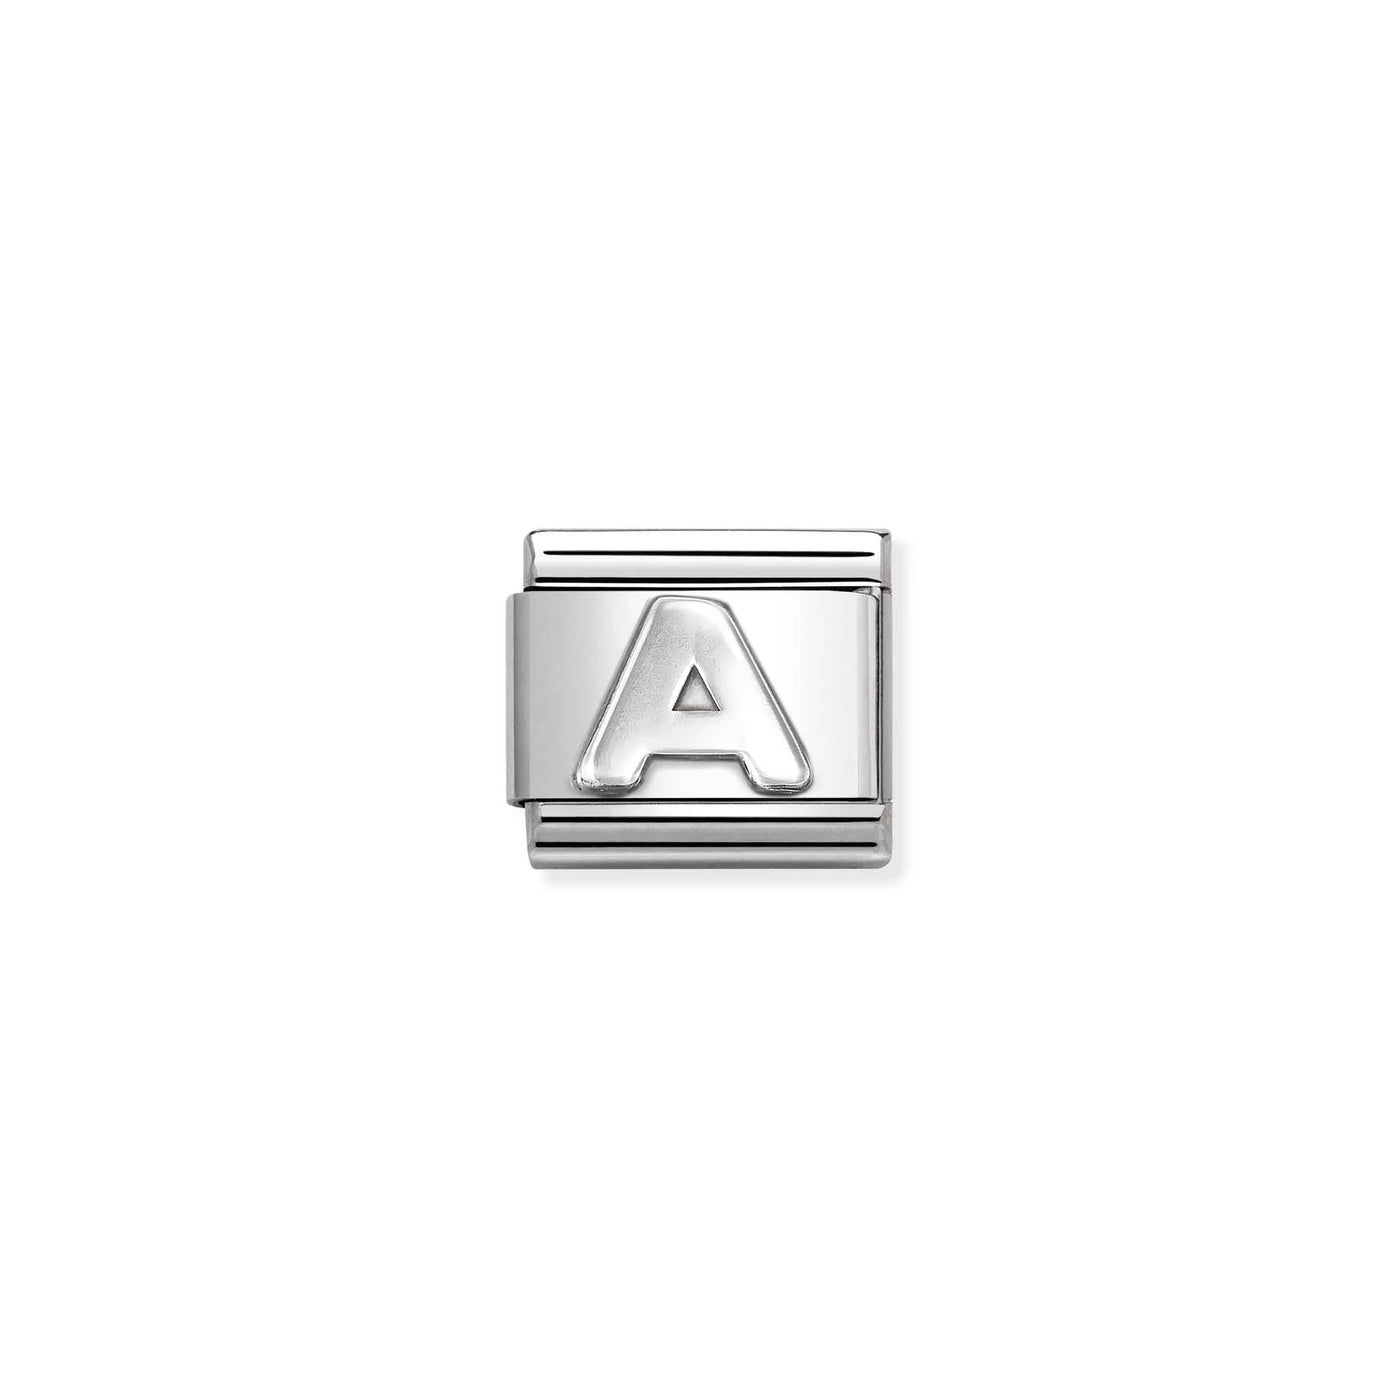 Letter A in silver on stainless steel.